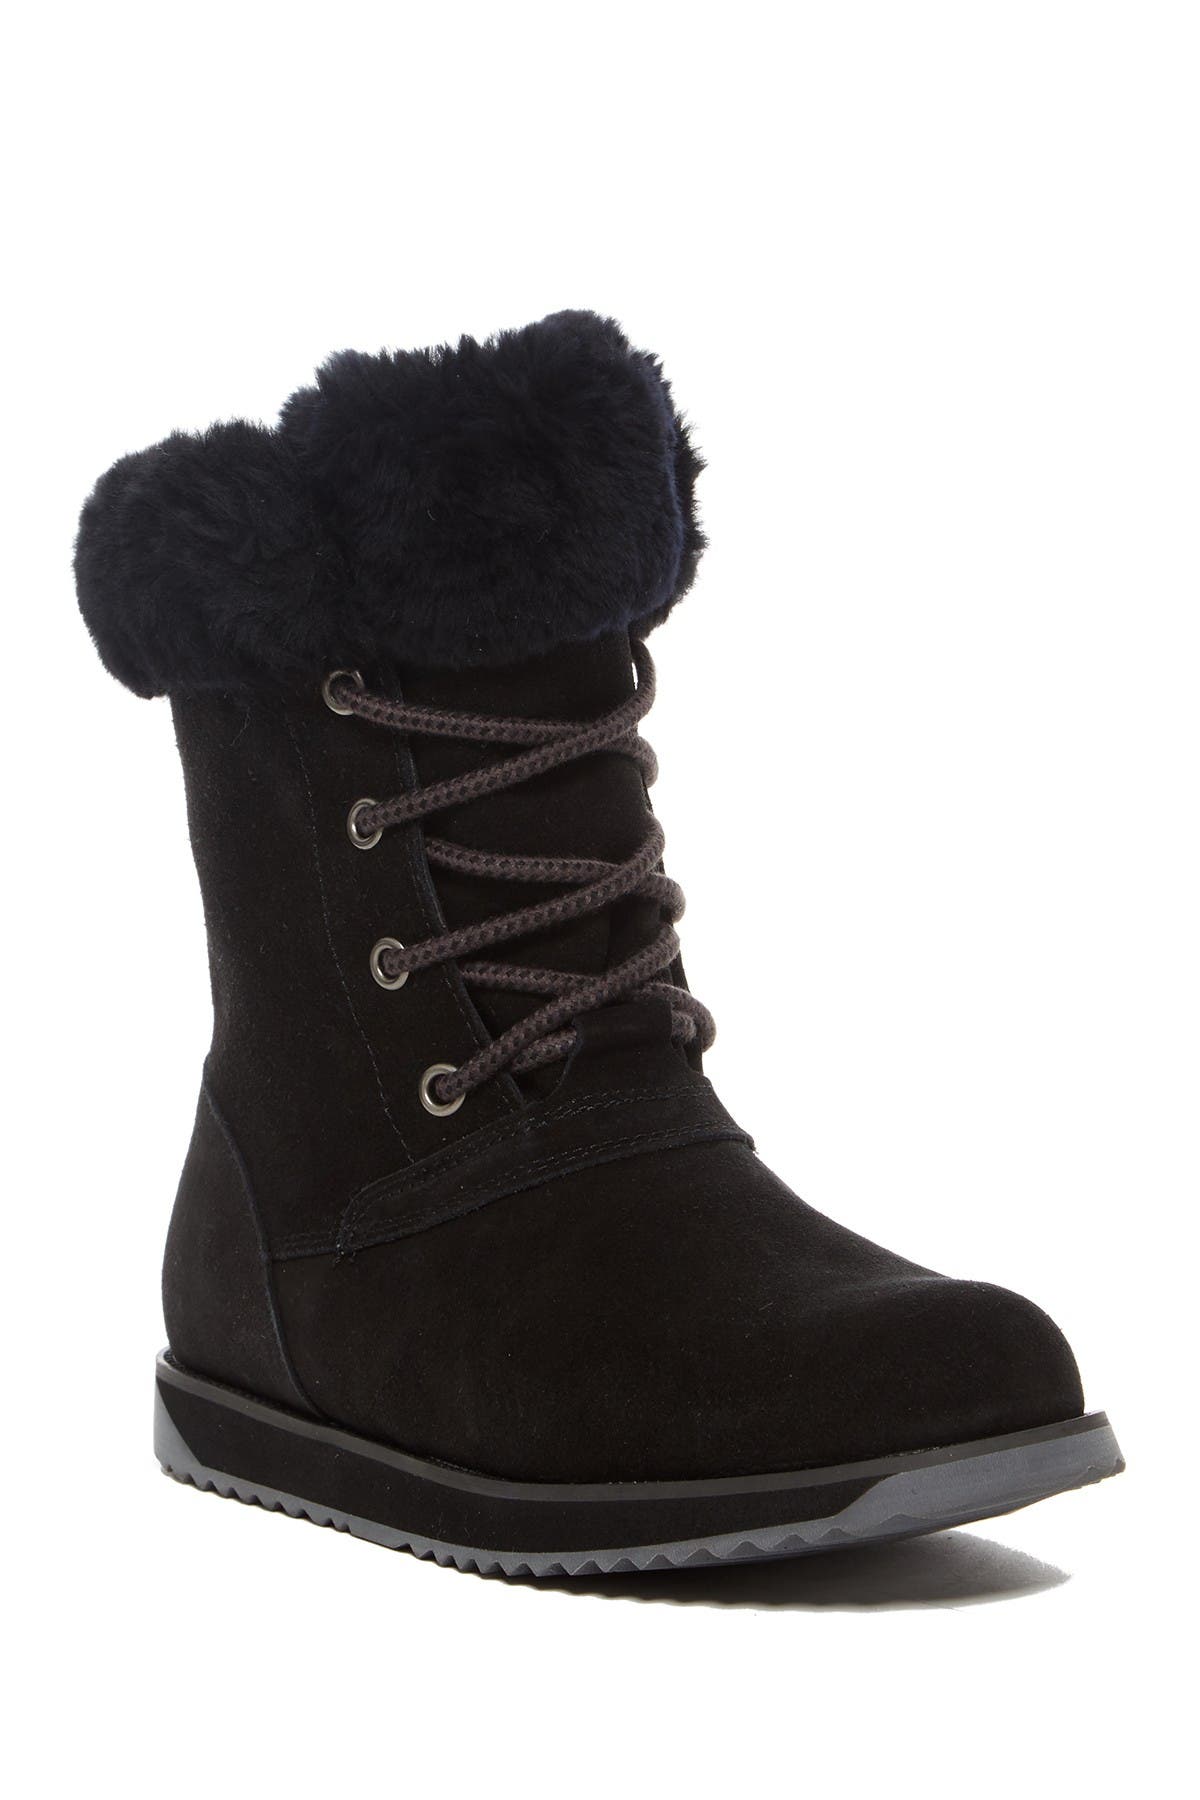 emu lace up boots